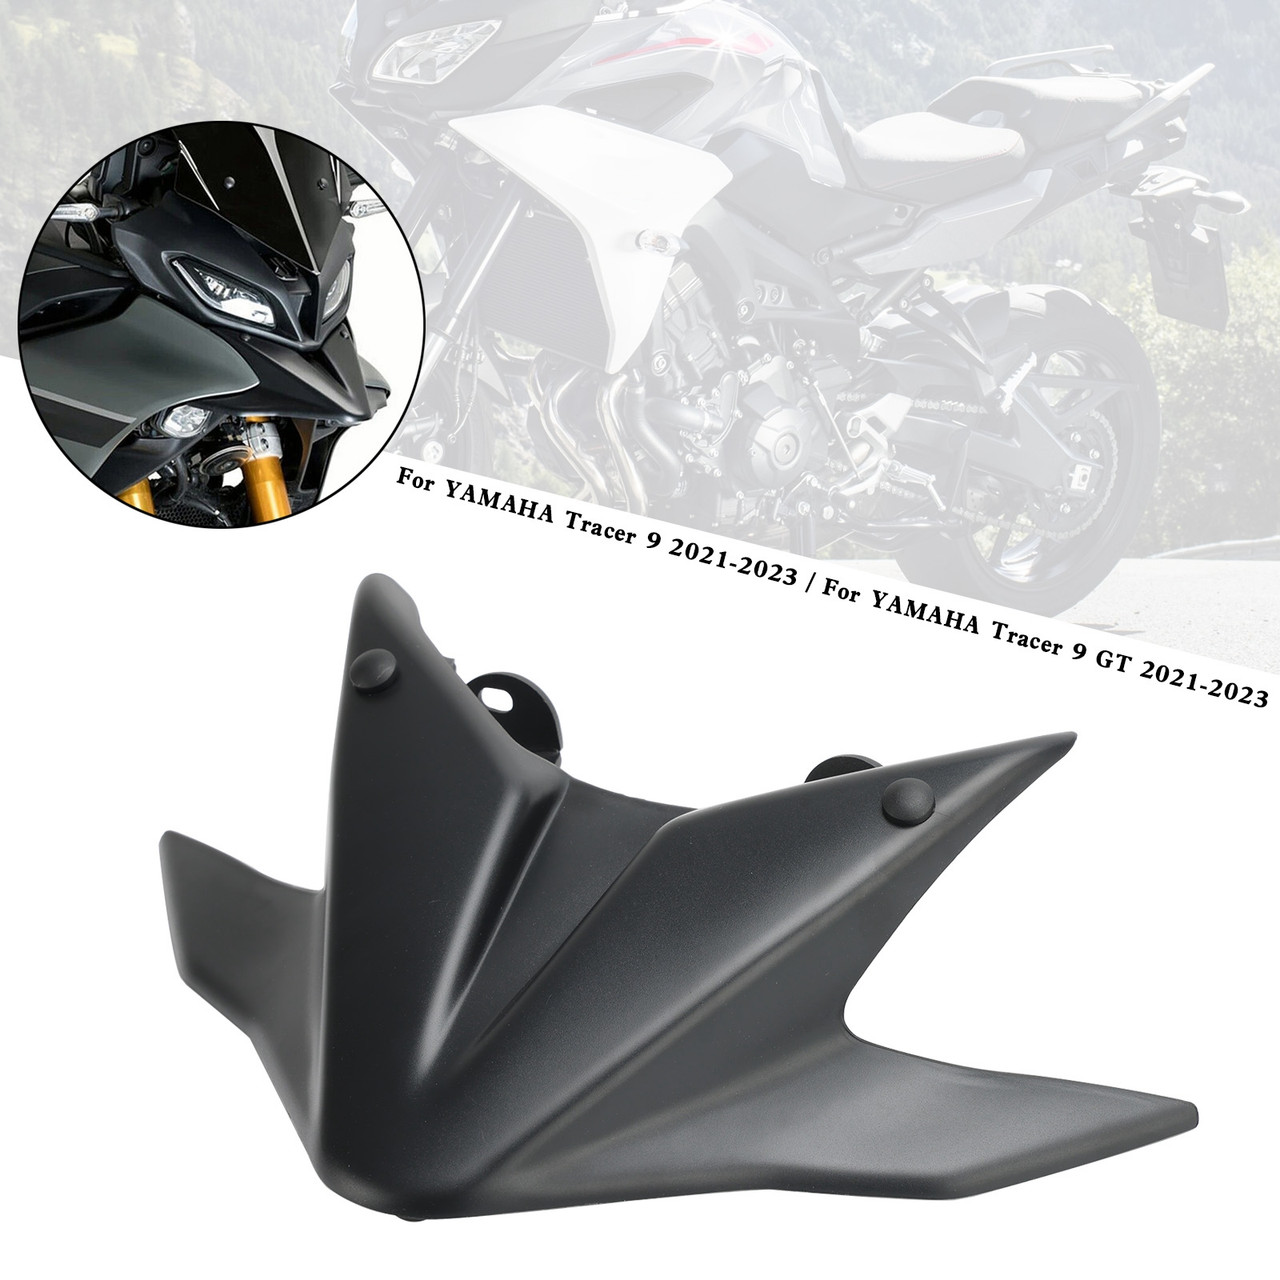 Front Wheel Beak Nose Cone Extension For YAMAHA Tracer 9 / GT 2021-2023